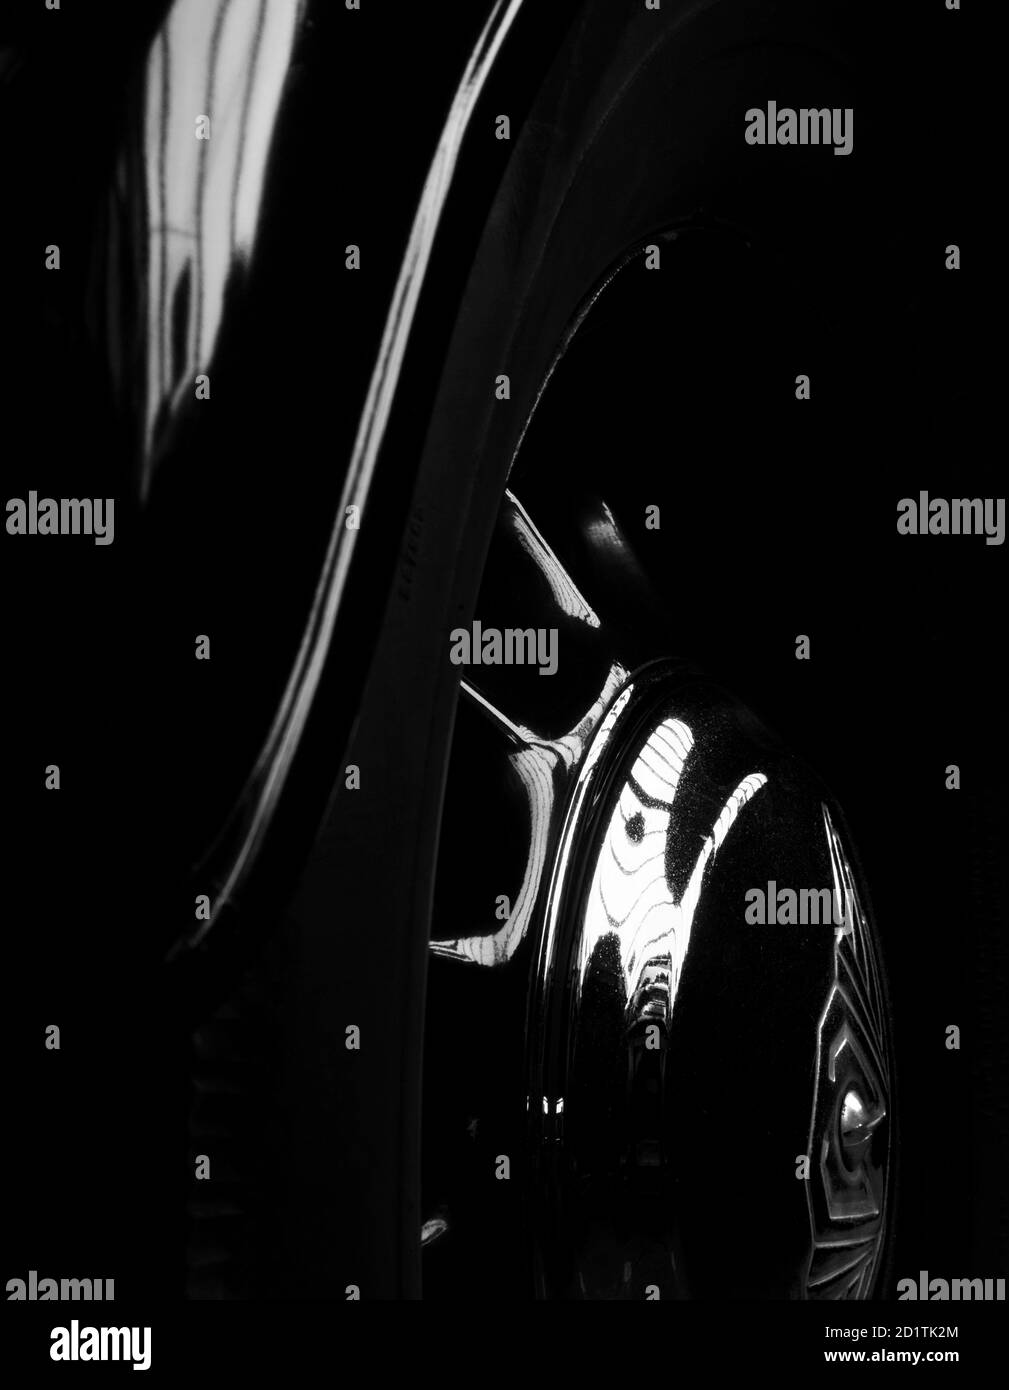 Abstract detail of black car's wheel and wheel arch. Stock Photo